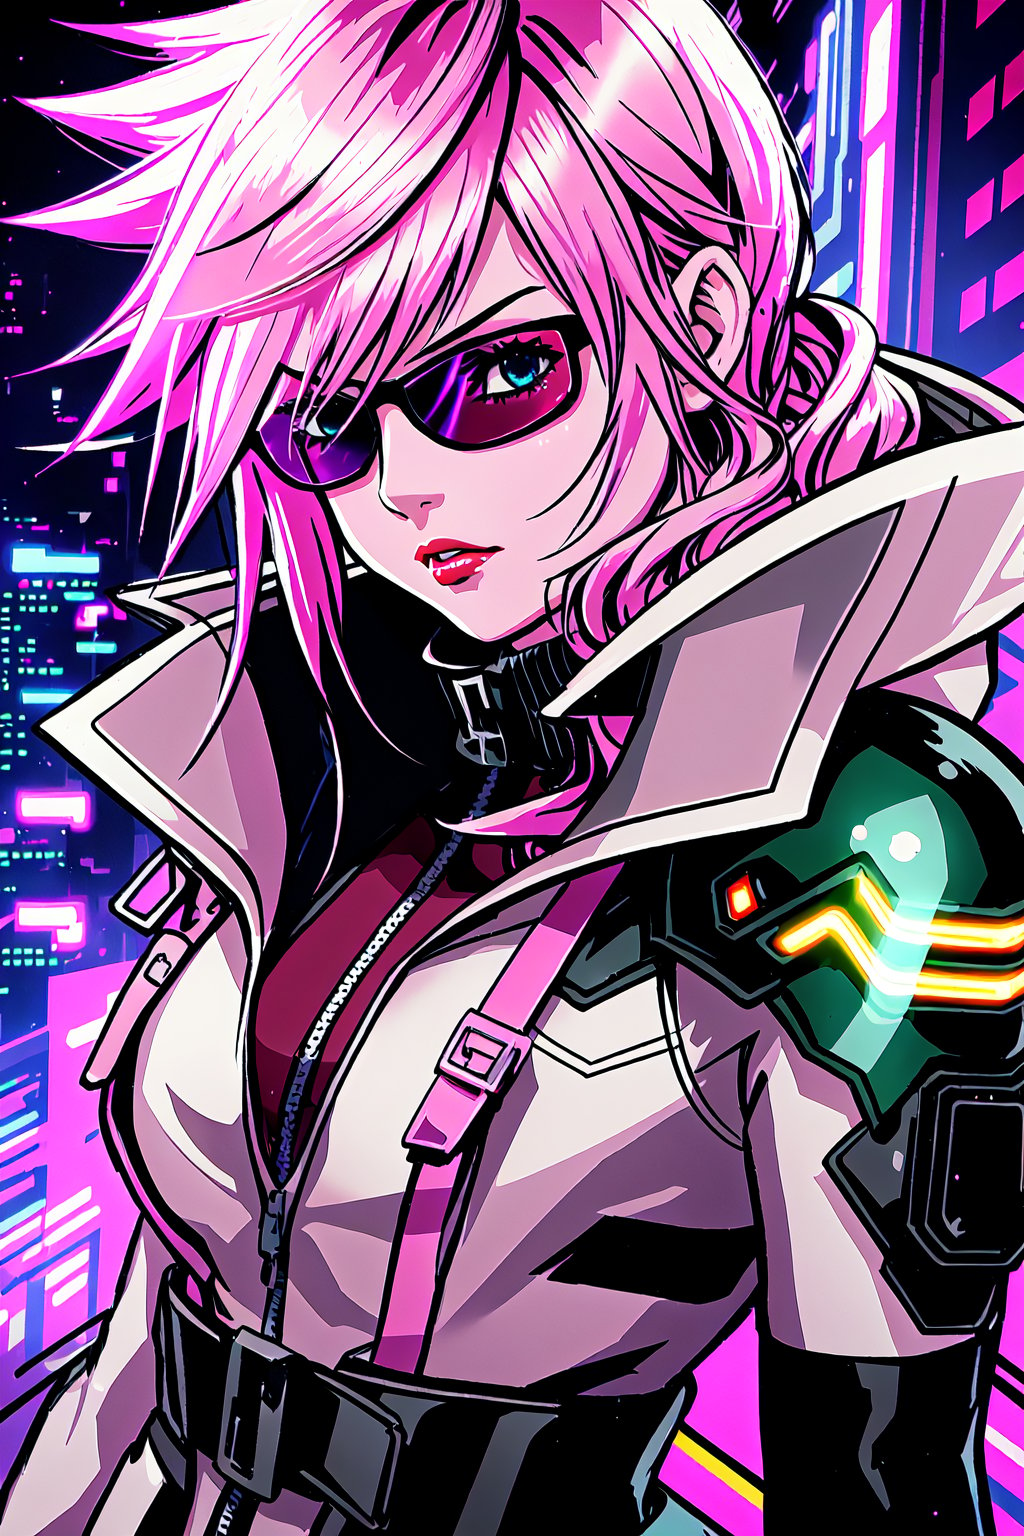 guiltys, stern, a girl, pixel glasses on, black dress, Clevage, upper body, dj theme, synthwave theme, (bokeh:1.1), depth of field, style of tetsuya nomura, tracers, vfx, splashes, lightning, light particles, electric, cyberpunk city background, Lightning, Final Fantasy game, Red lips, parted_lips, pink light hair, lightning farron, no glasses